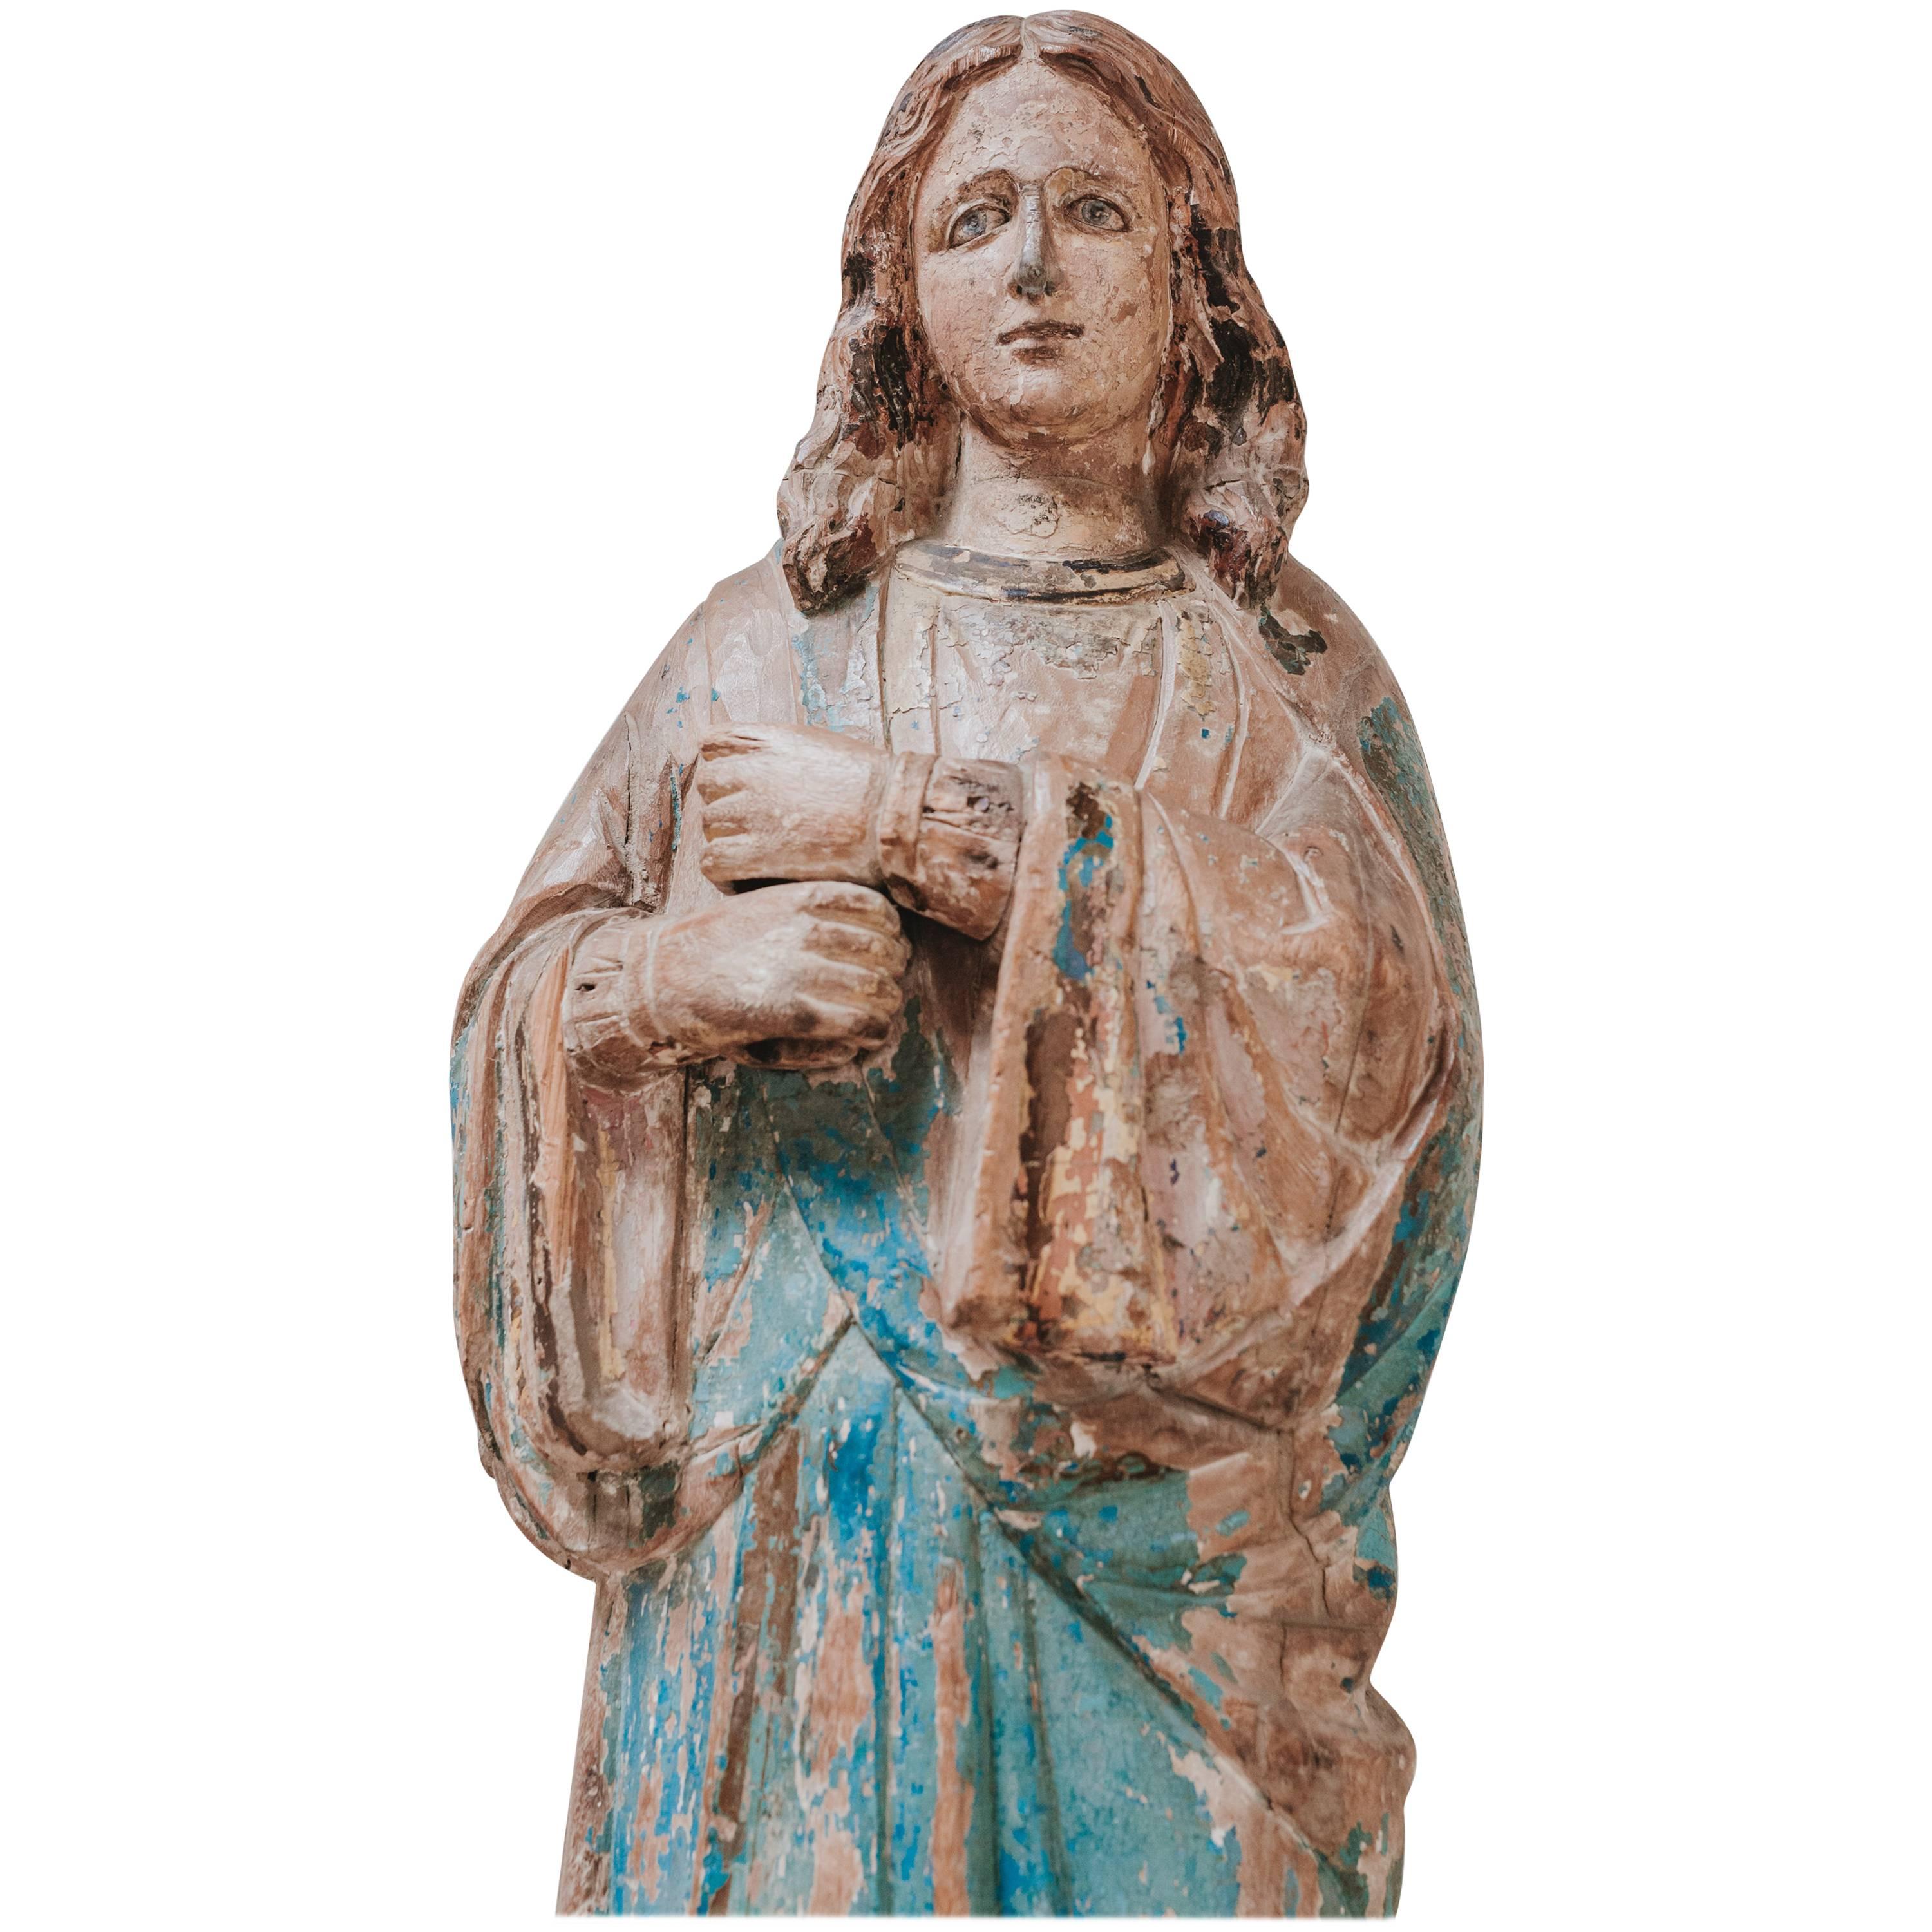 17th Century Polychromed Wooden Statue or Sculpture of Saint Helena